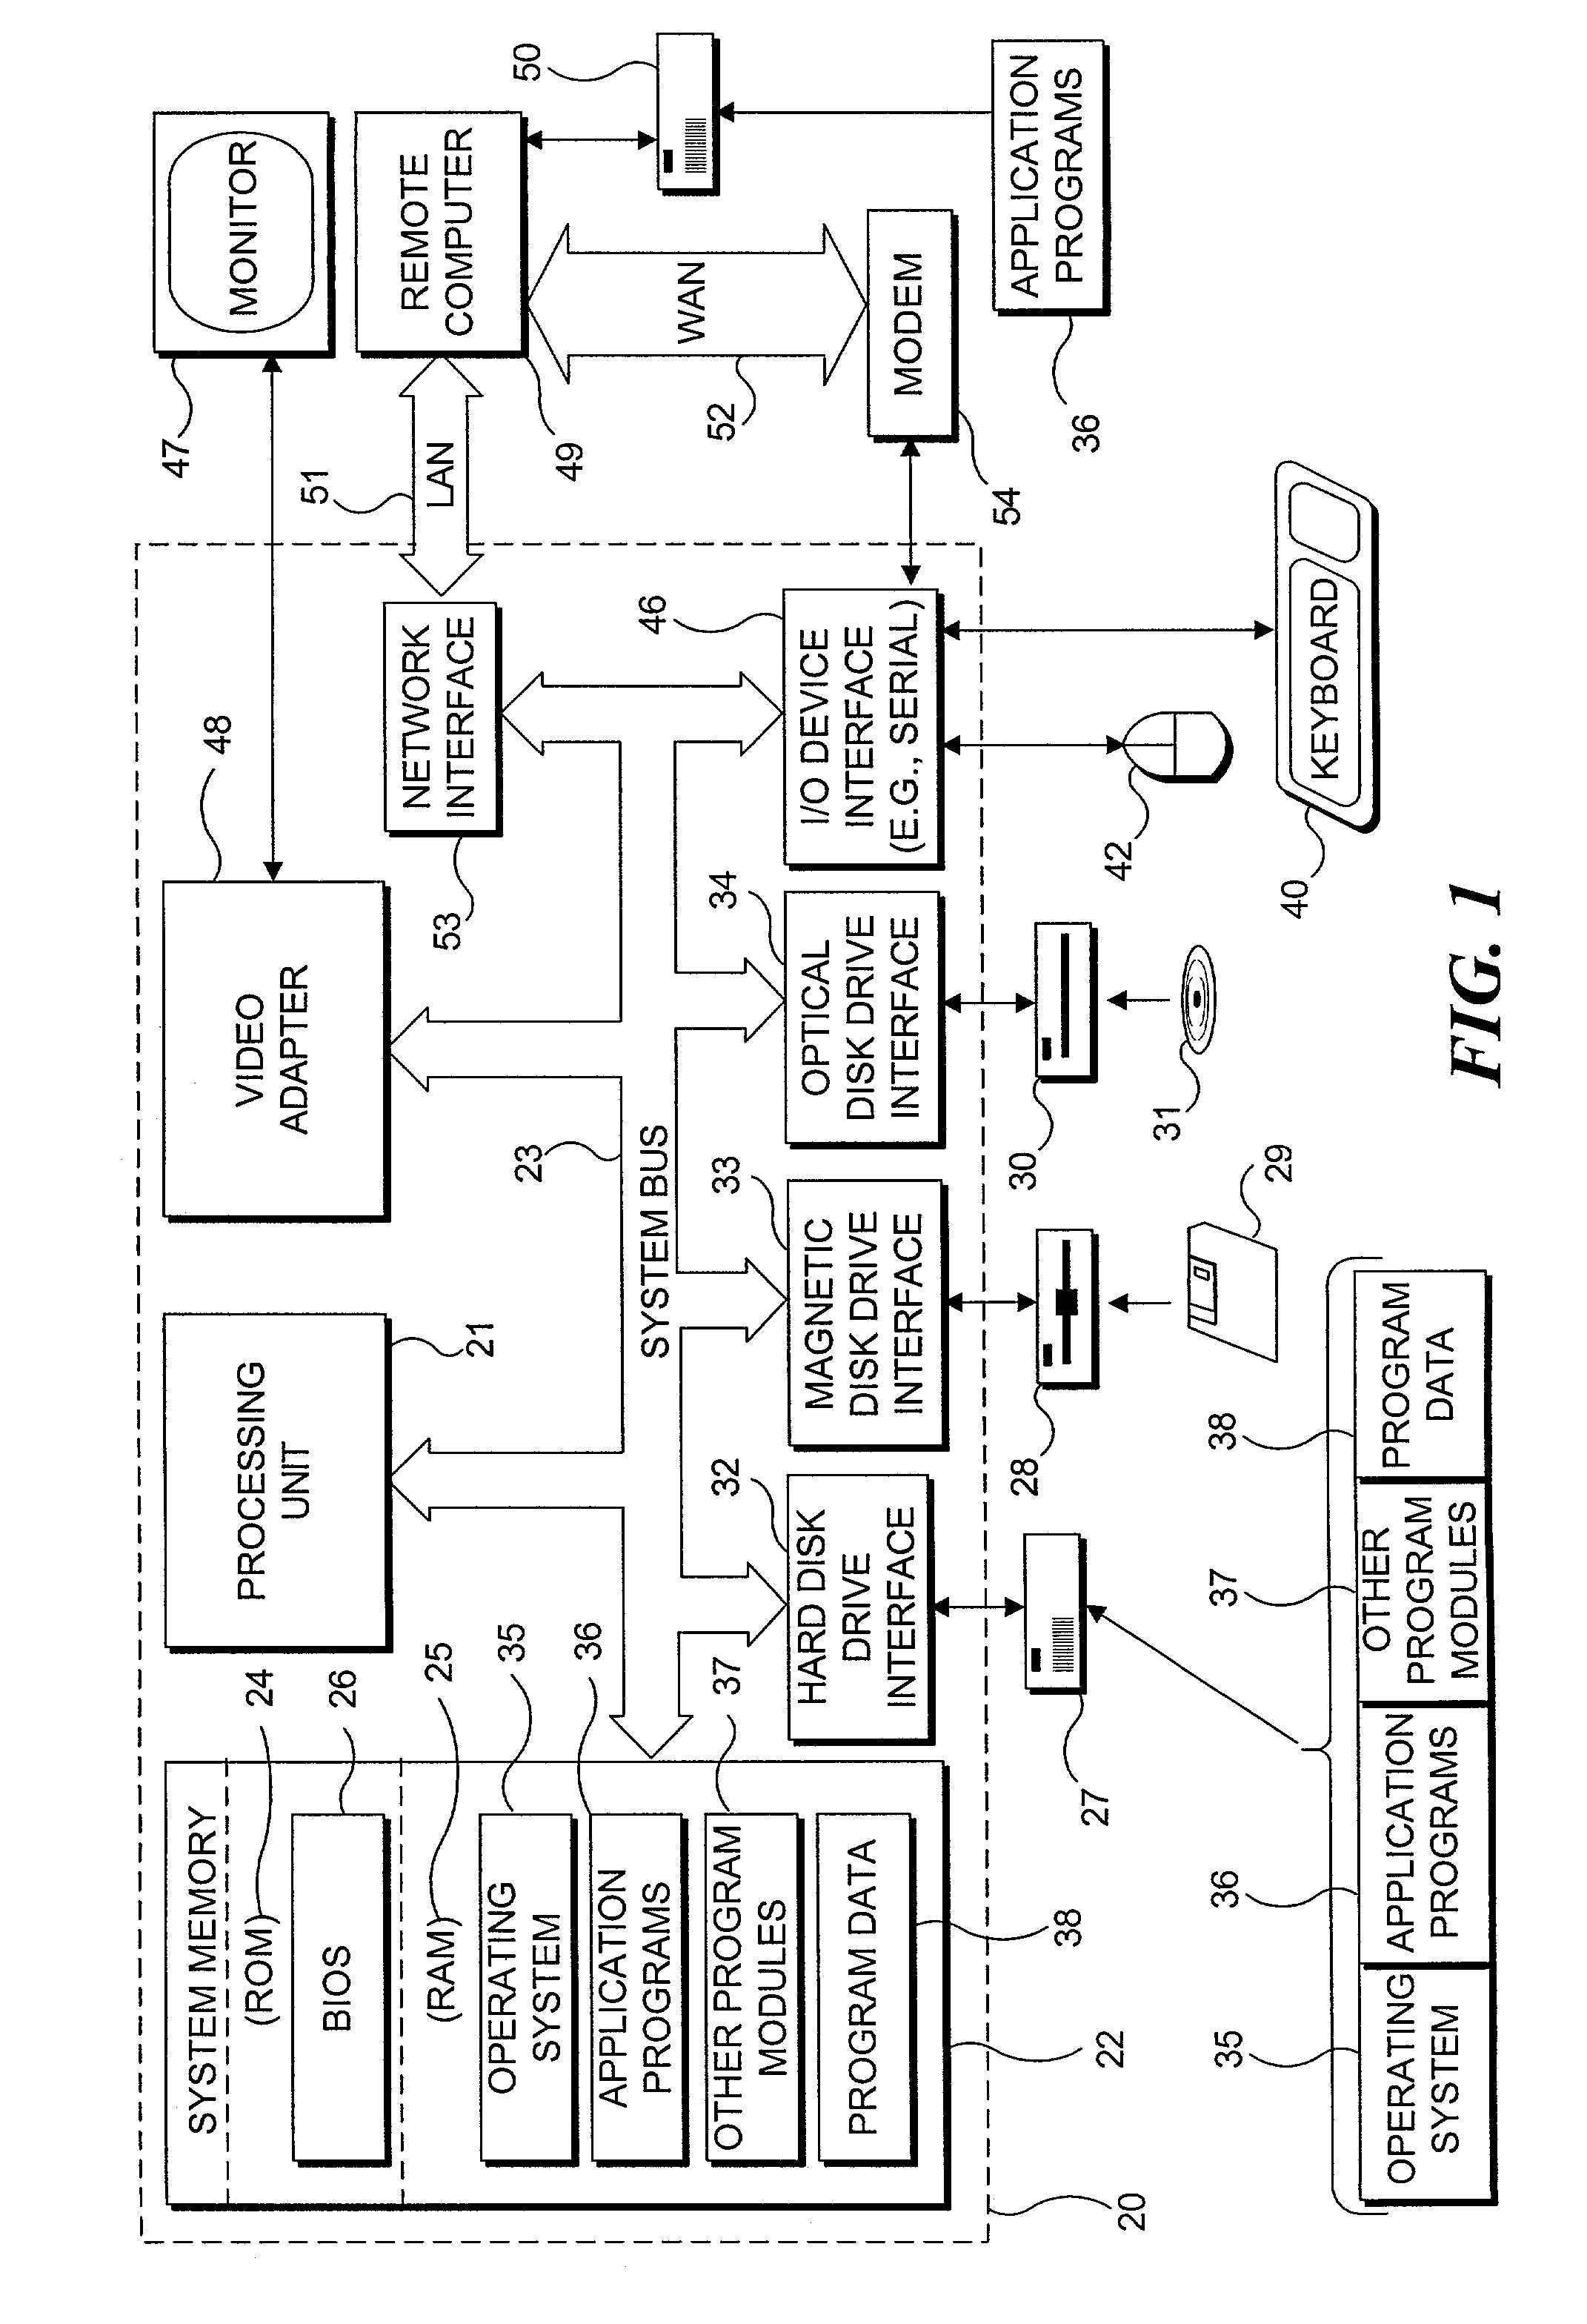 Method and apparatus enabling migration of clients to a specific version of a server-hosted application, where multiple software versions of the server-hosted application are installed on a network